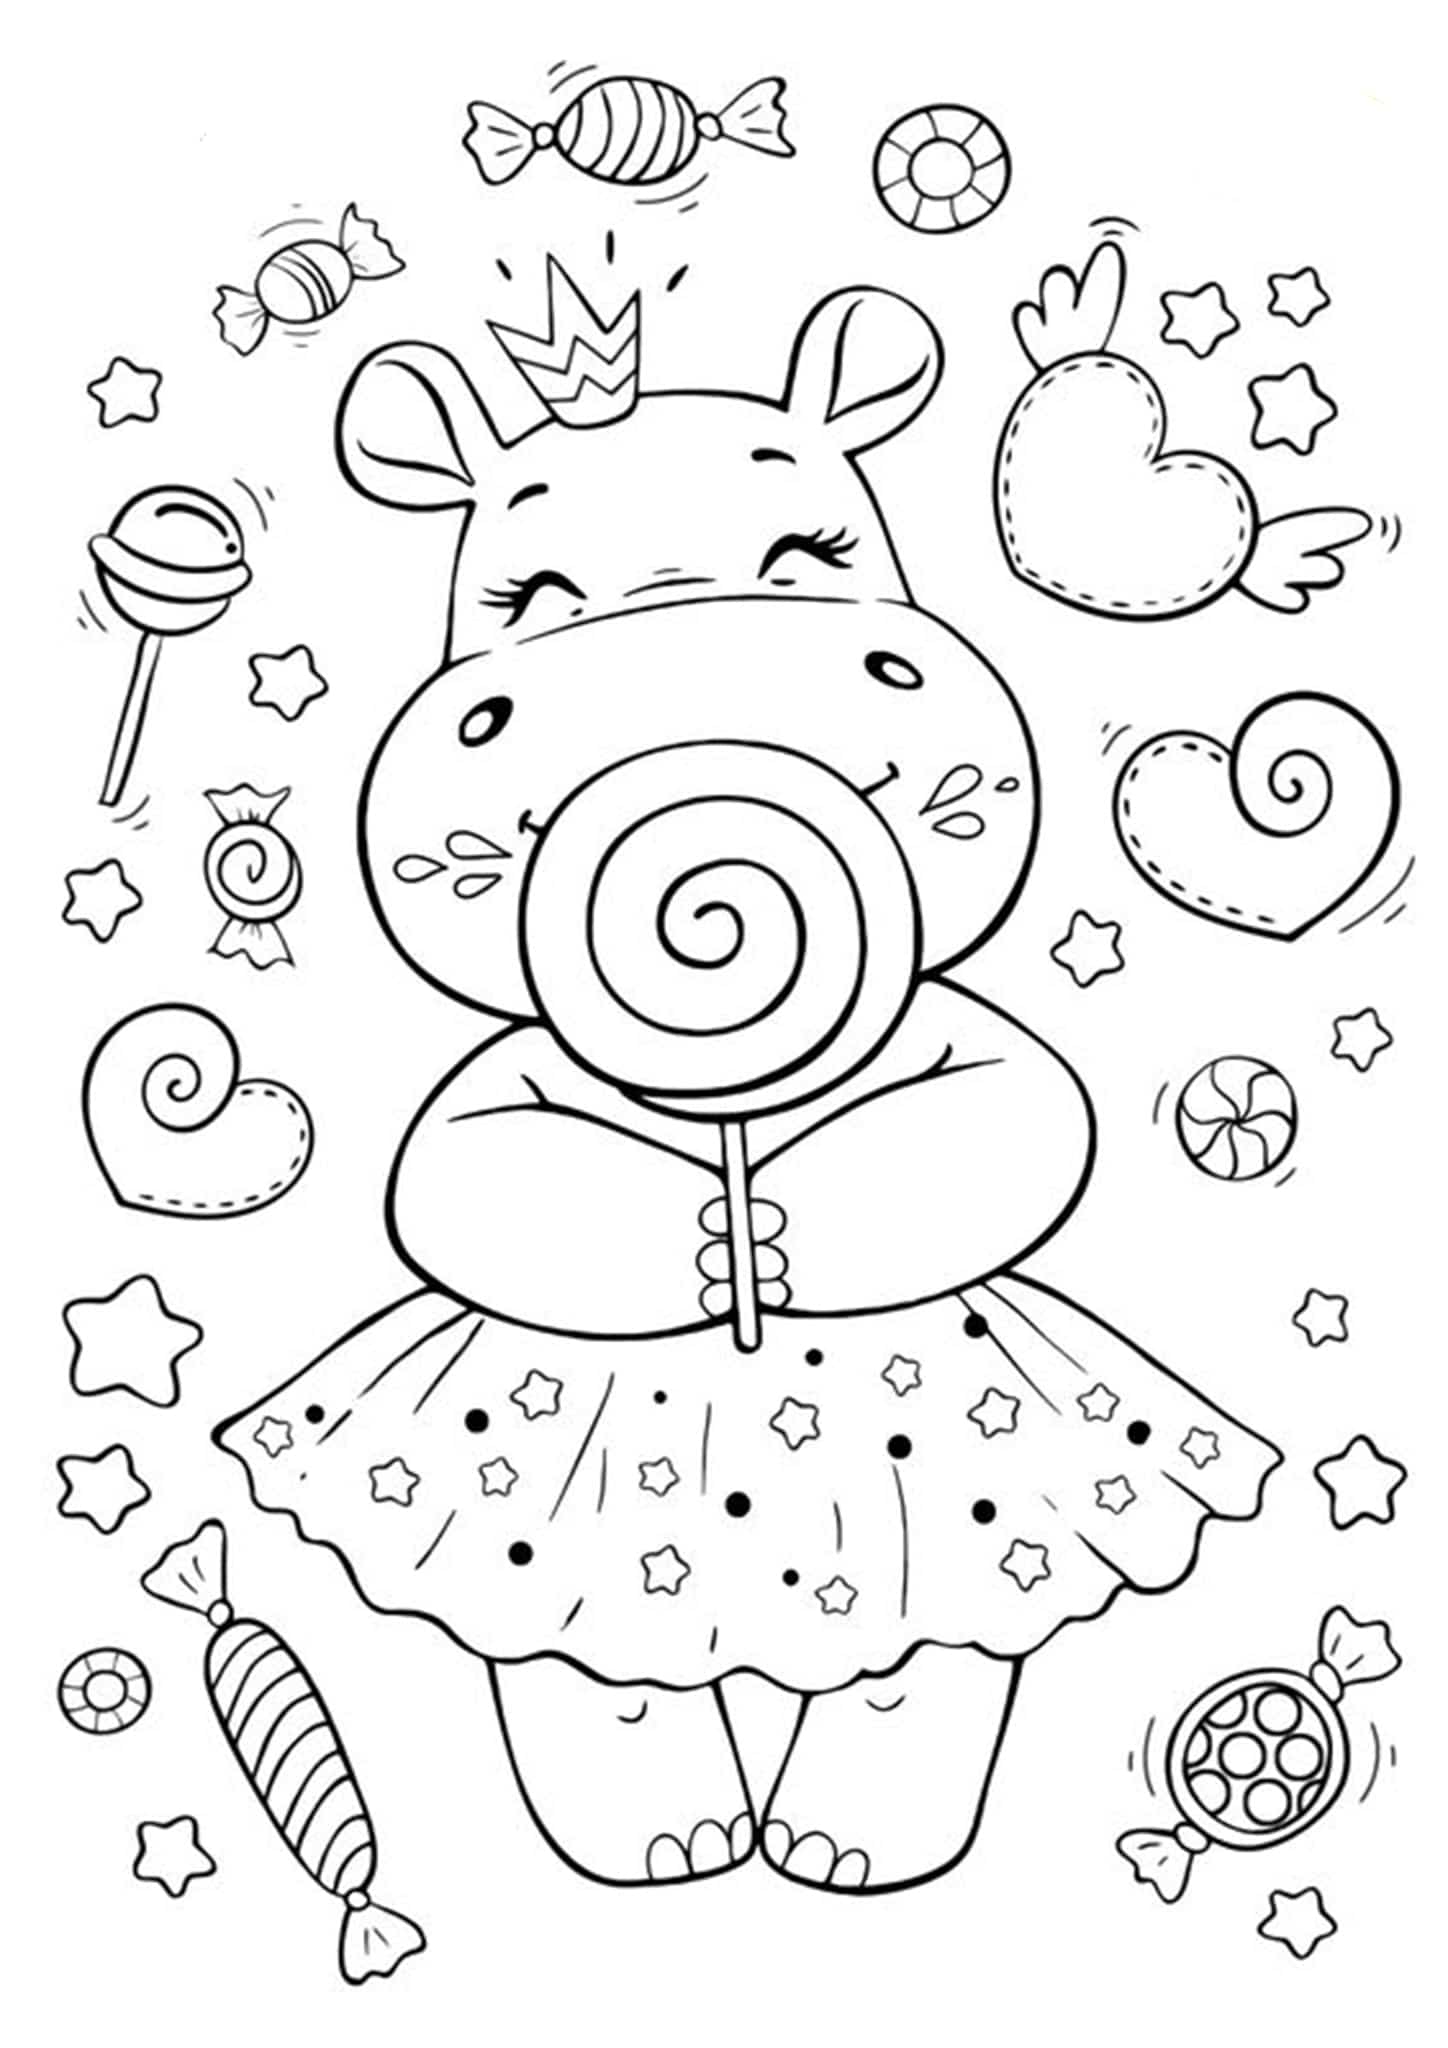 Free easy to print cute coloring pages